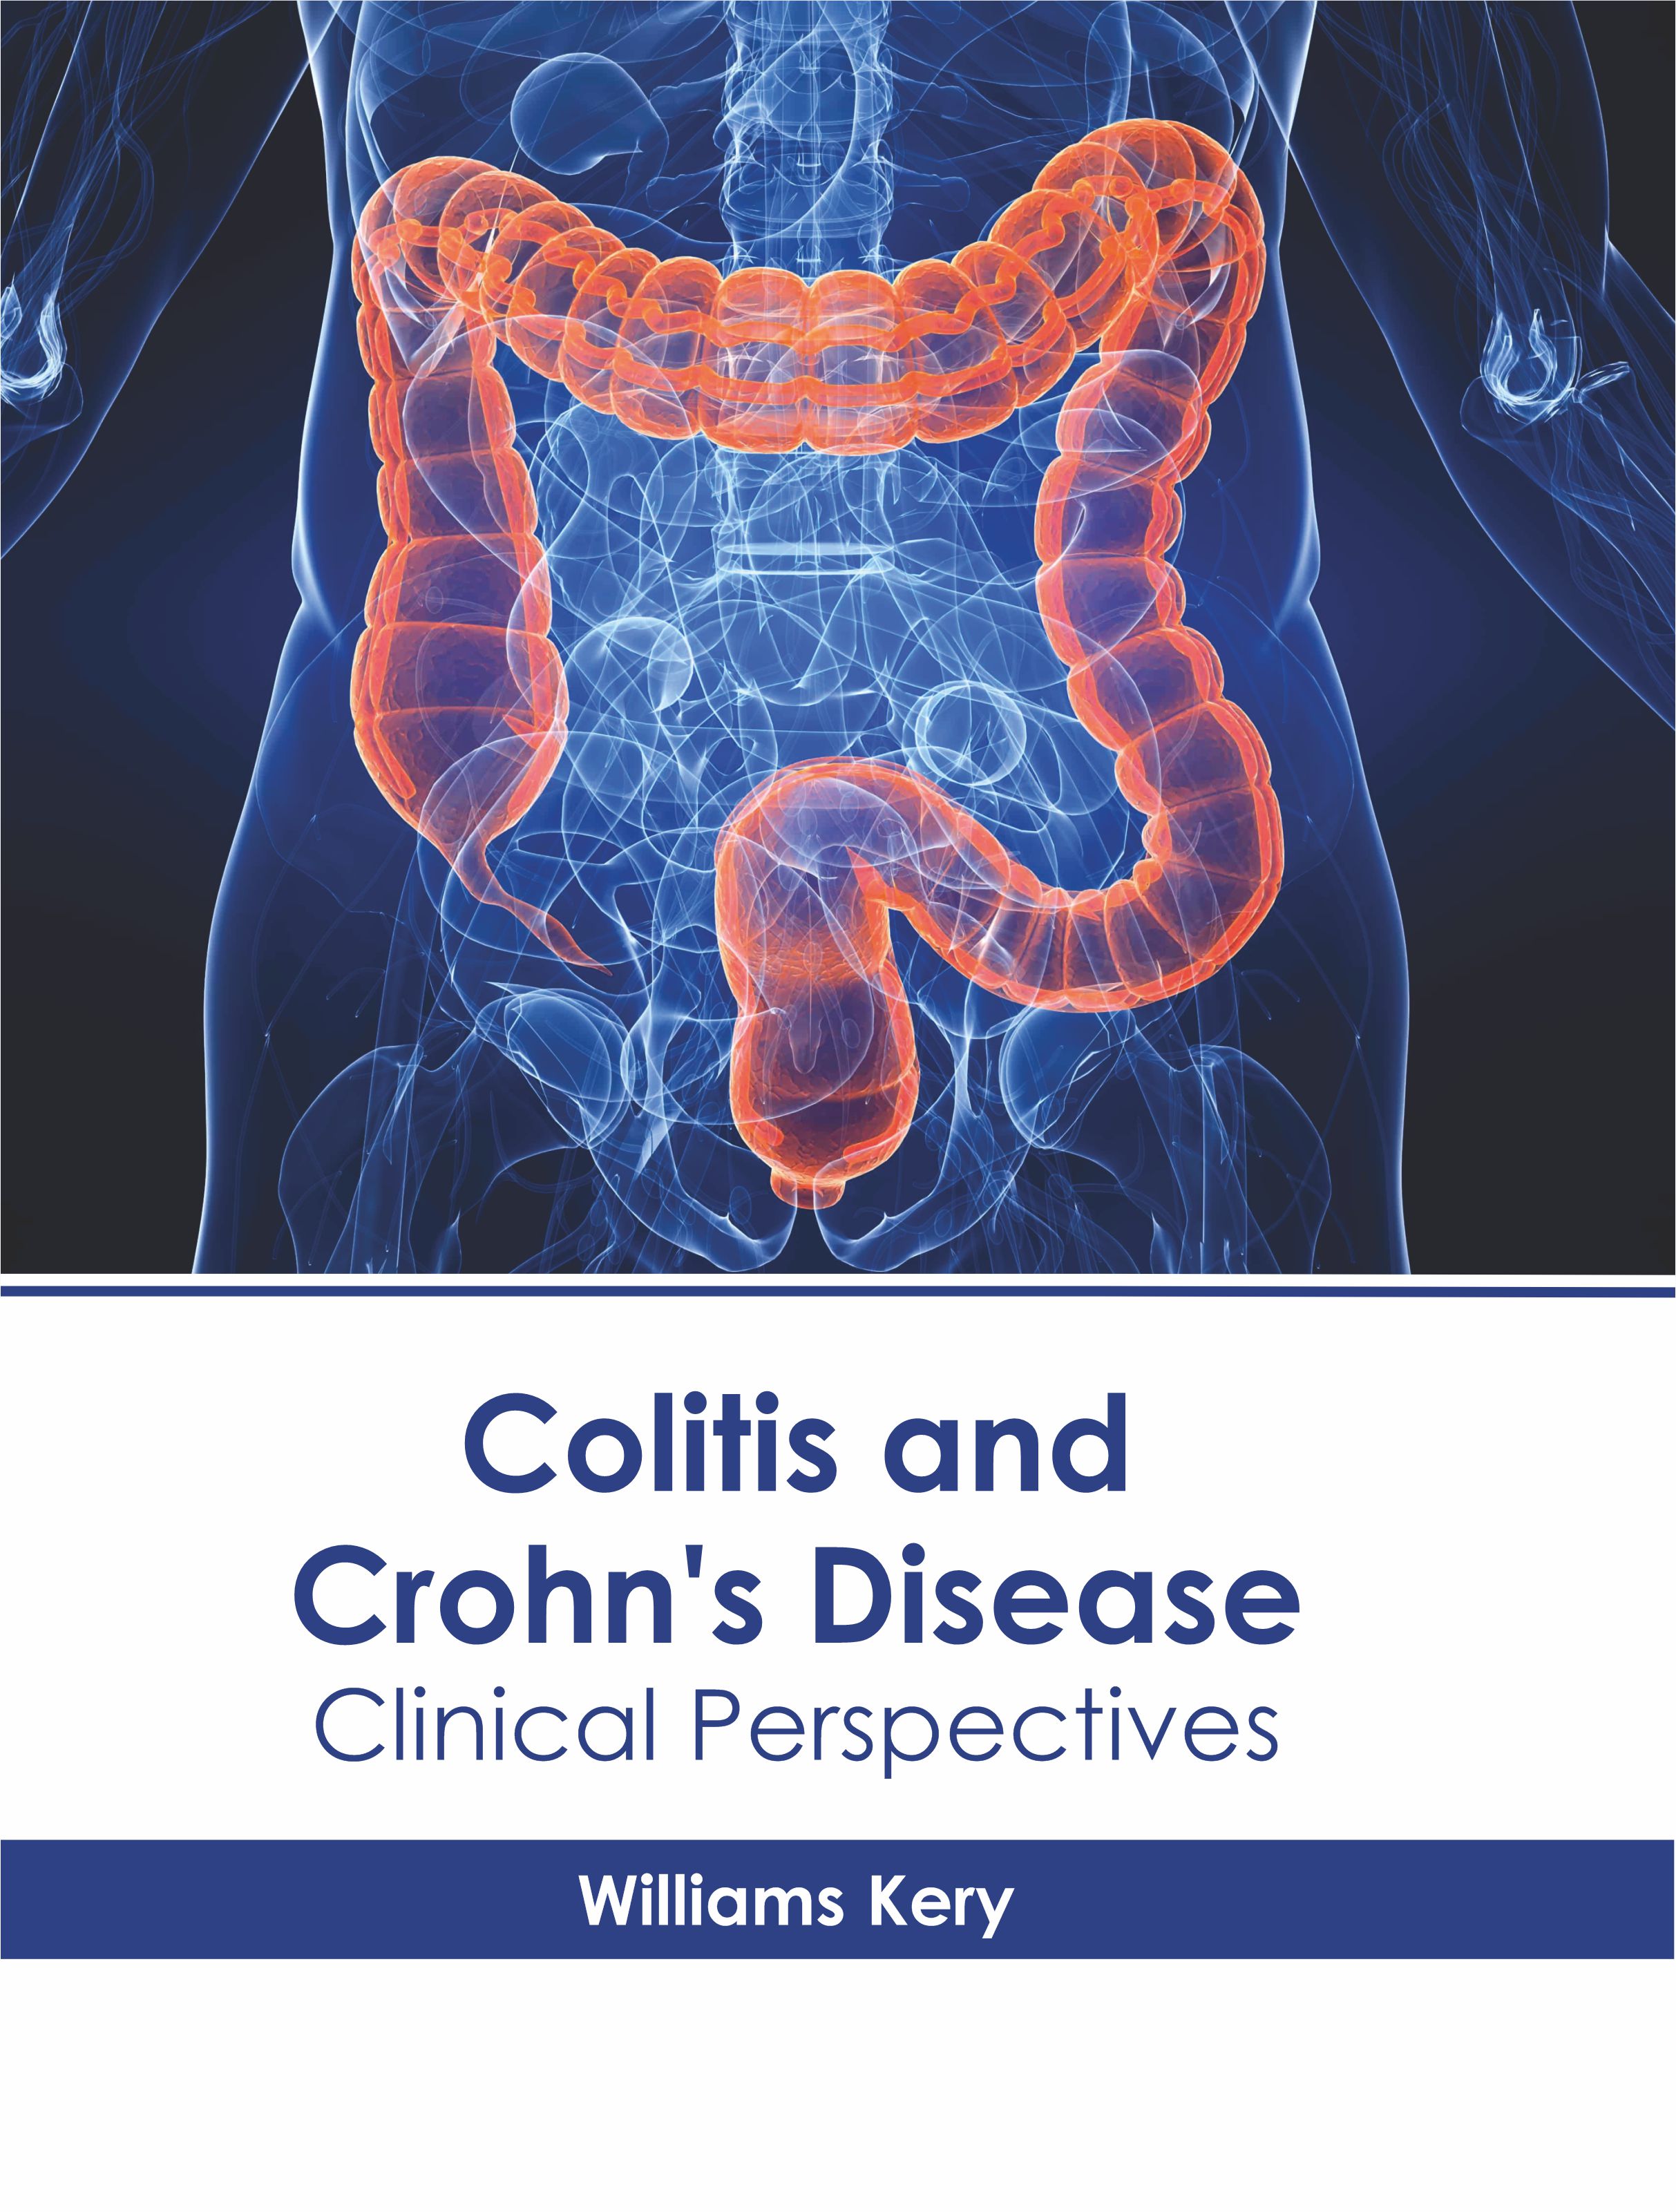 

exclusive-publishers/american-medical-publishers/colitis-and-crohn-s-disease-clinical-perspectives-9781639271337